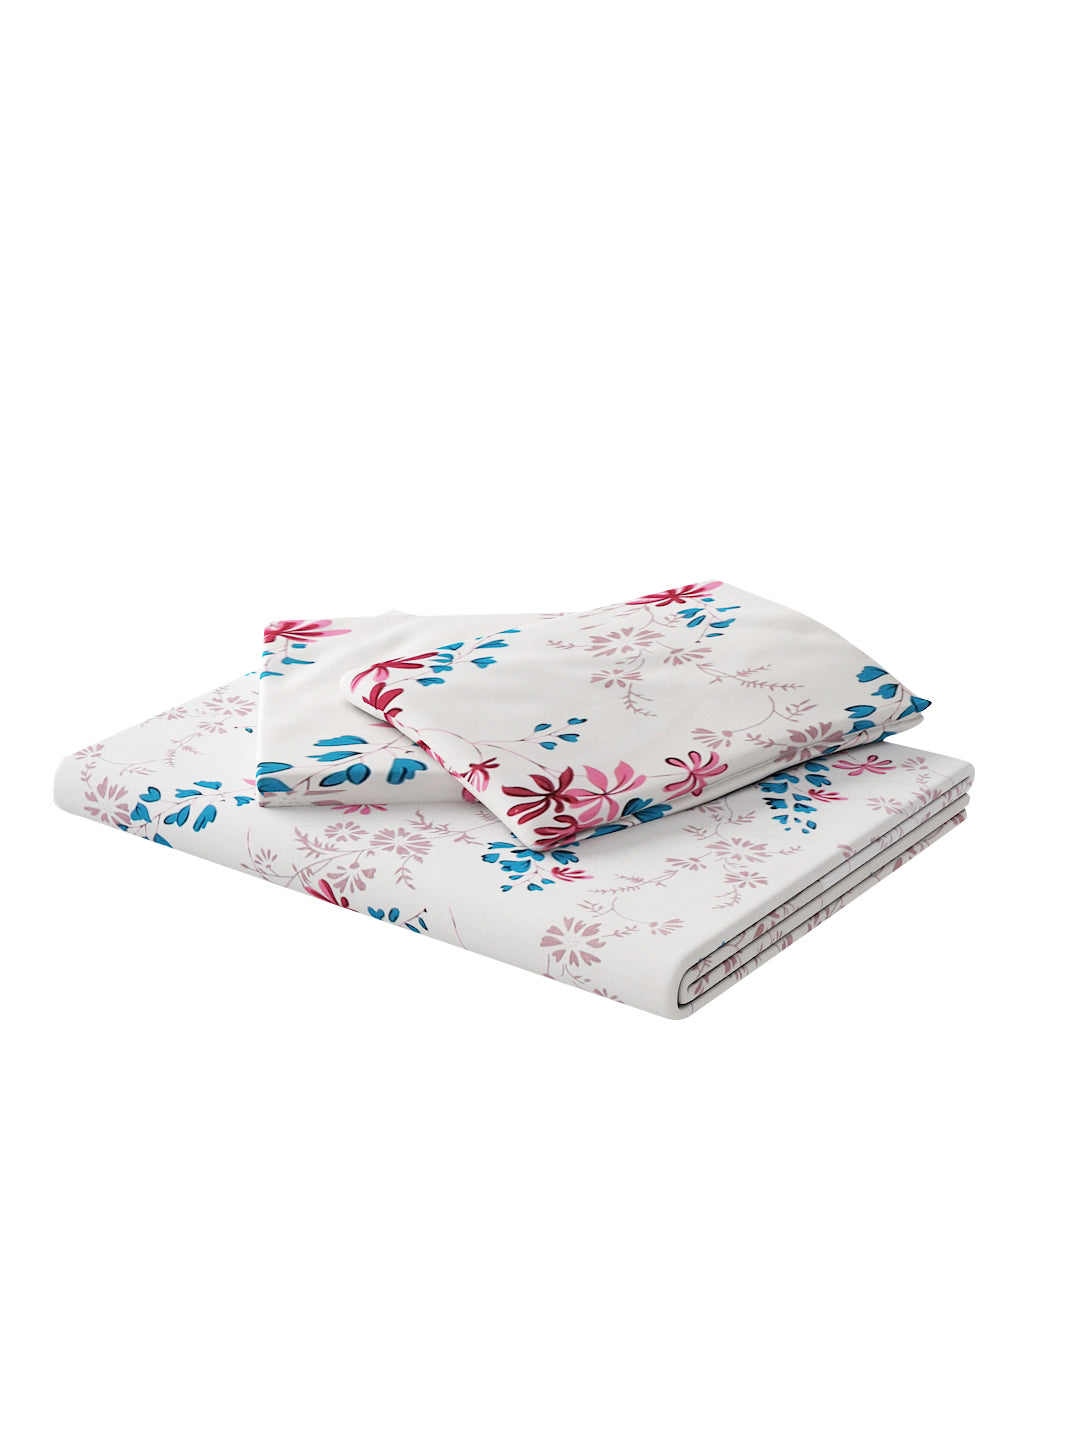 180 TC Double Bed Cotton Bedsheet with 2 Pillow Covers-White,Pink